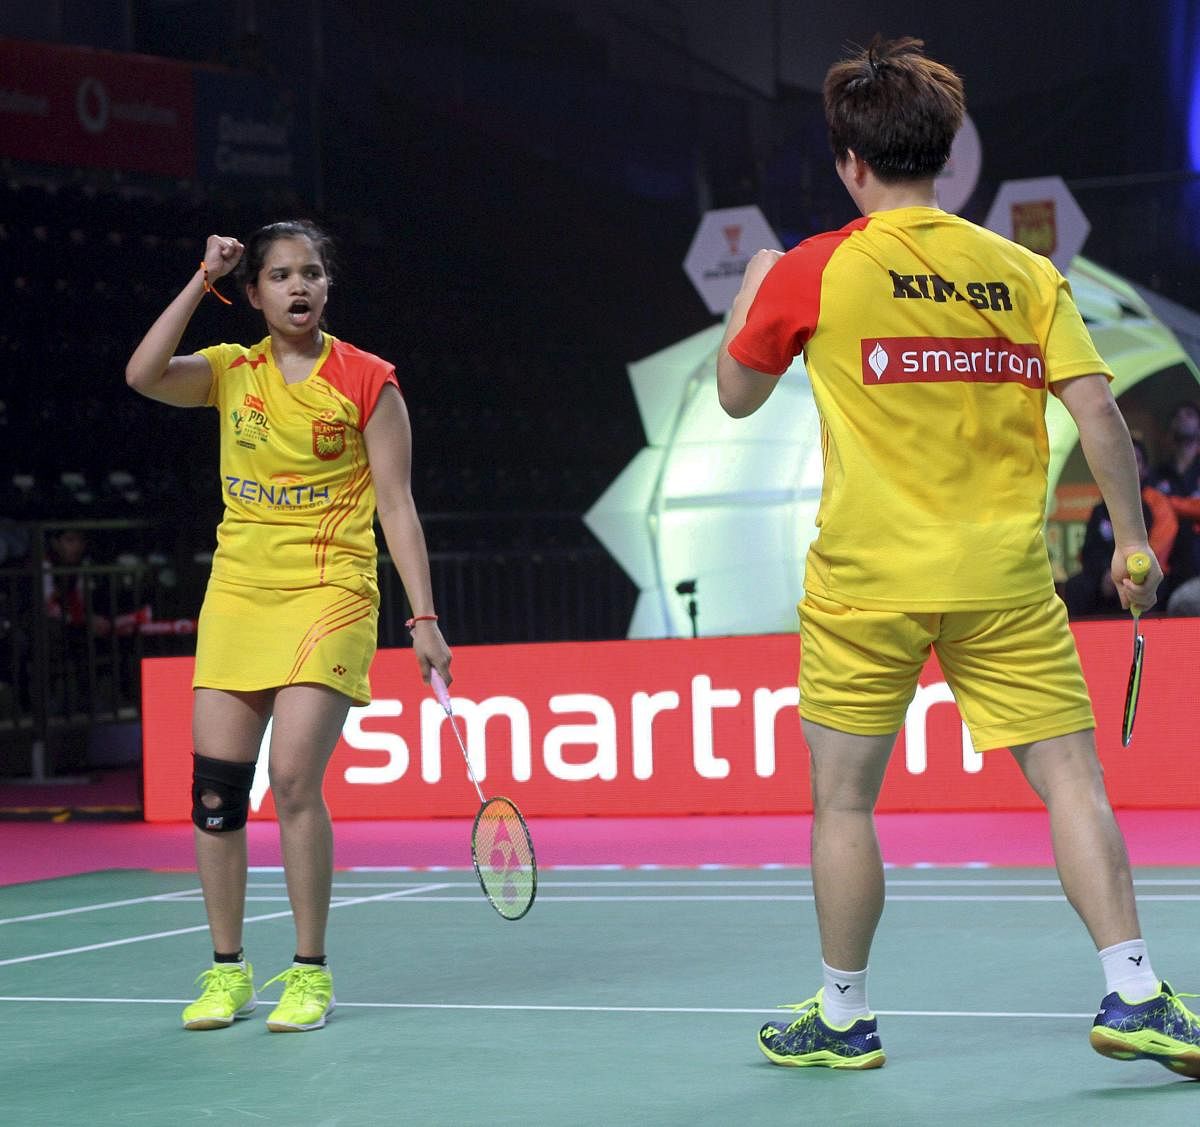 In-form: N Sikki Reddy (left) and Kim Rang of Bengaluru Blasters react after winning a point against Ashwini Ponappa and Vladimir Ivanov of Delhi Dashers during the Premier Badminton League mixed doubles match in New Delhi on Thursday. PTI